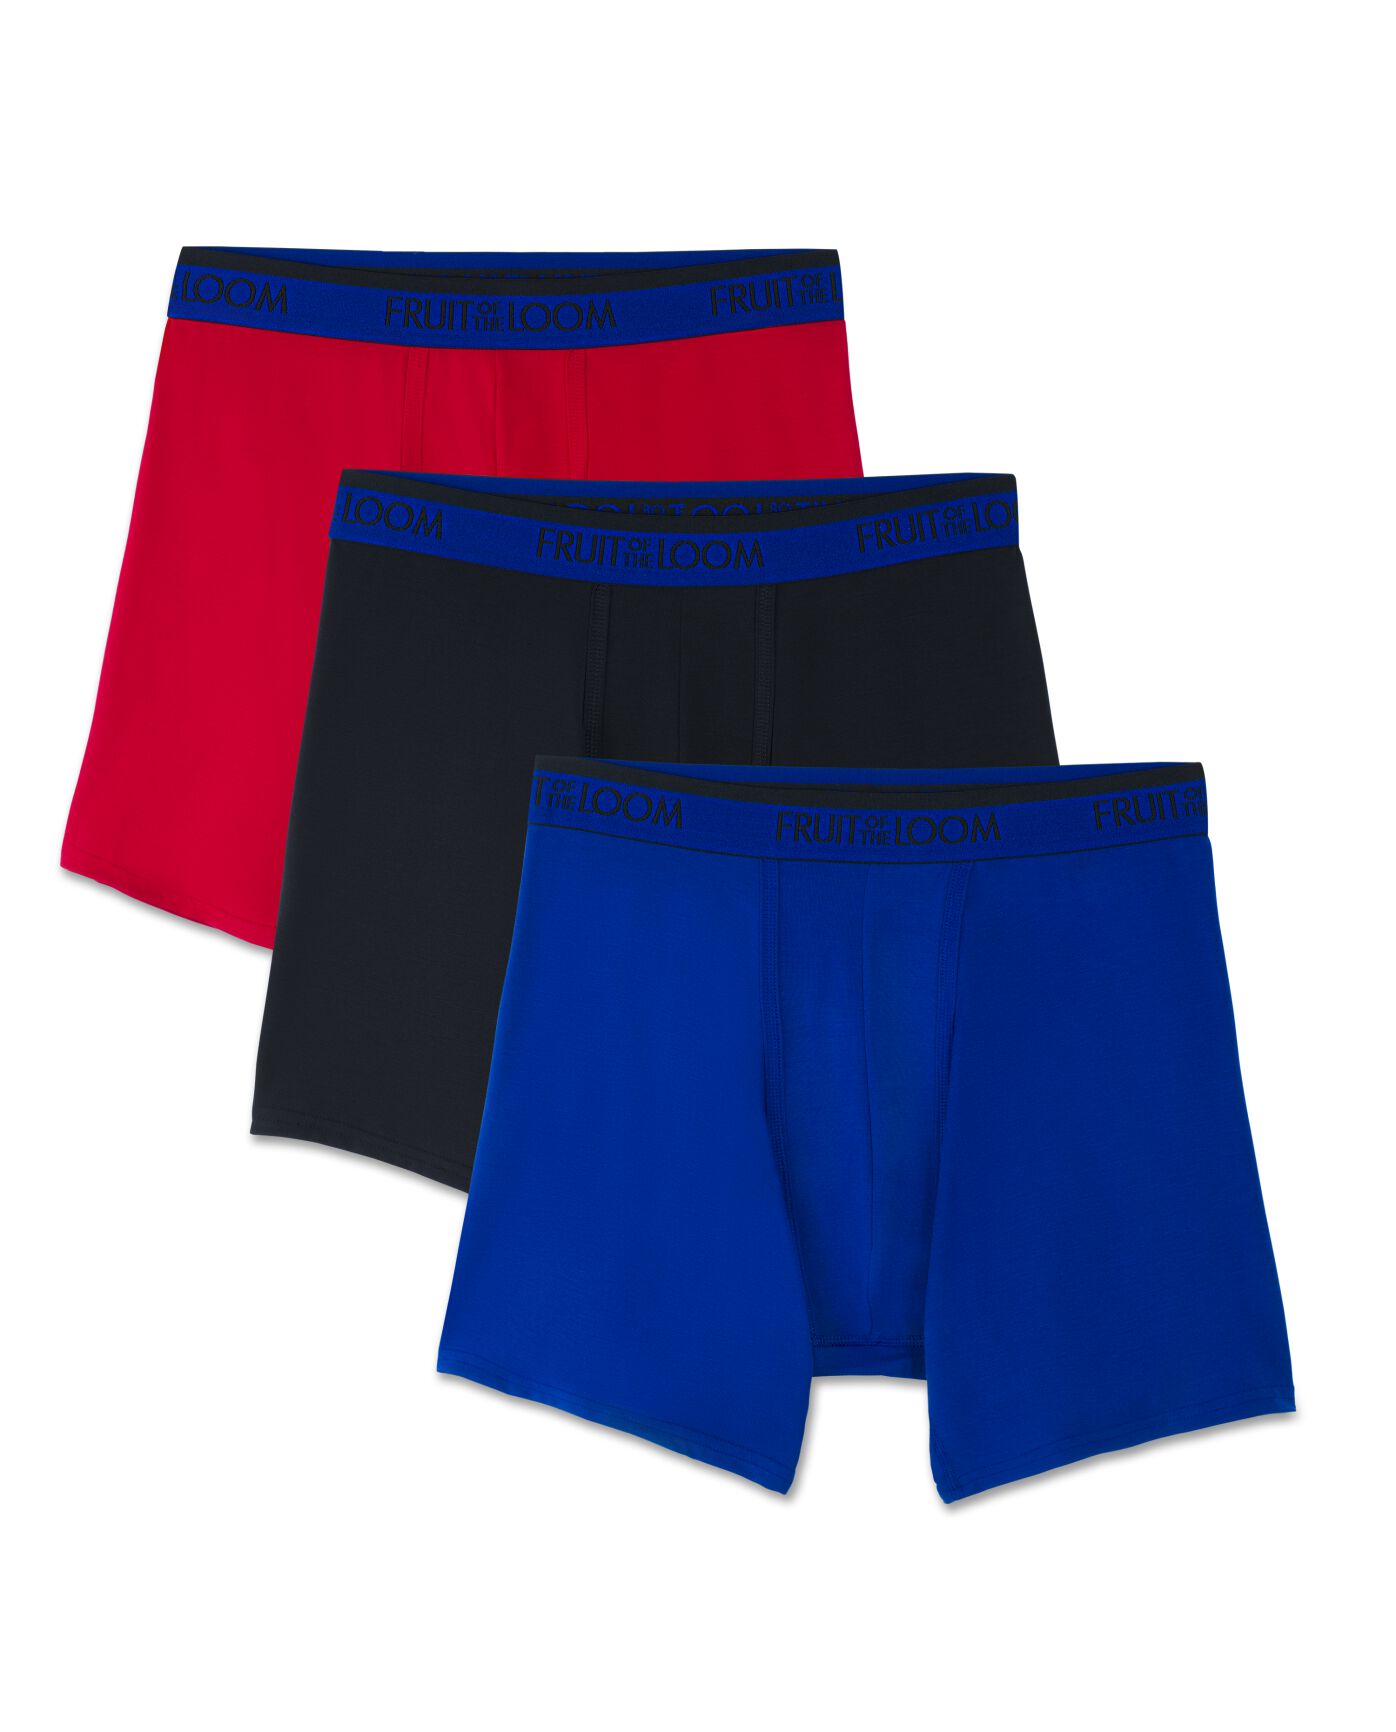 Fruit of the Loom Premium Cool Blend Men's Boxer Briefs, 3 Pack - Assorted